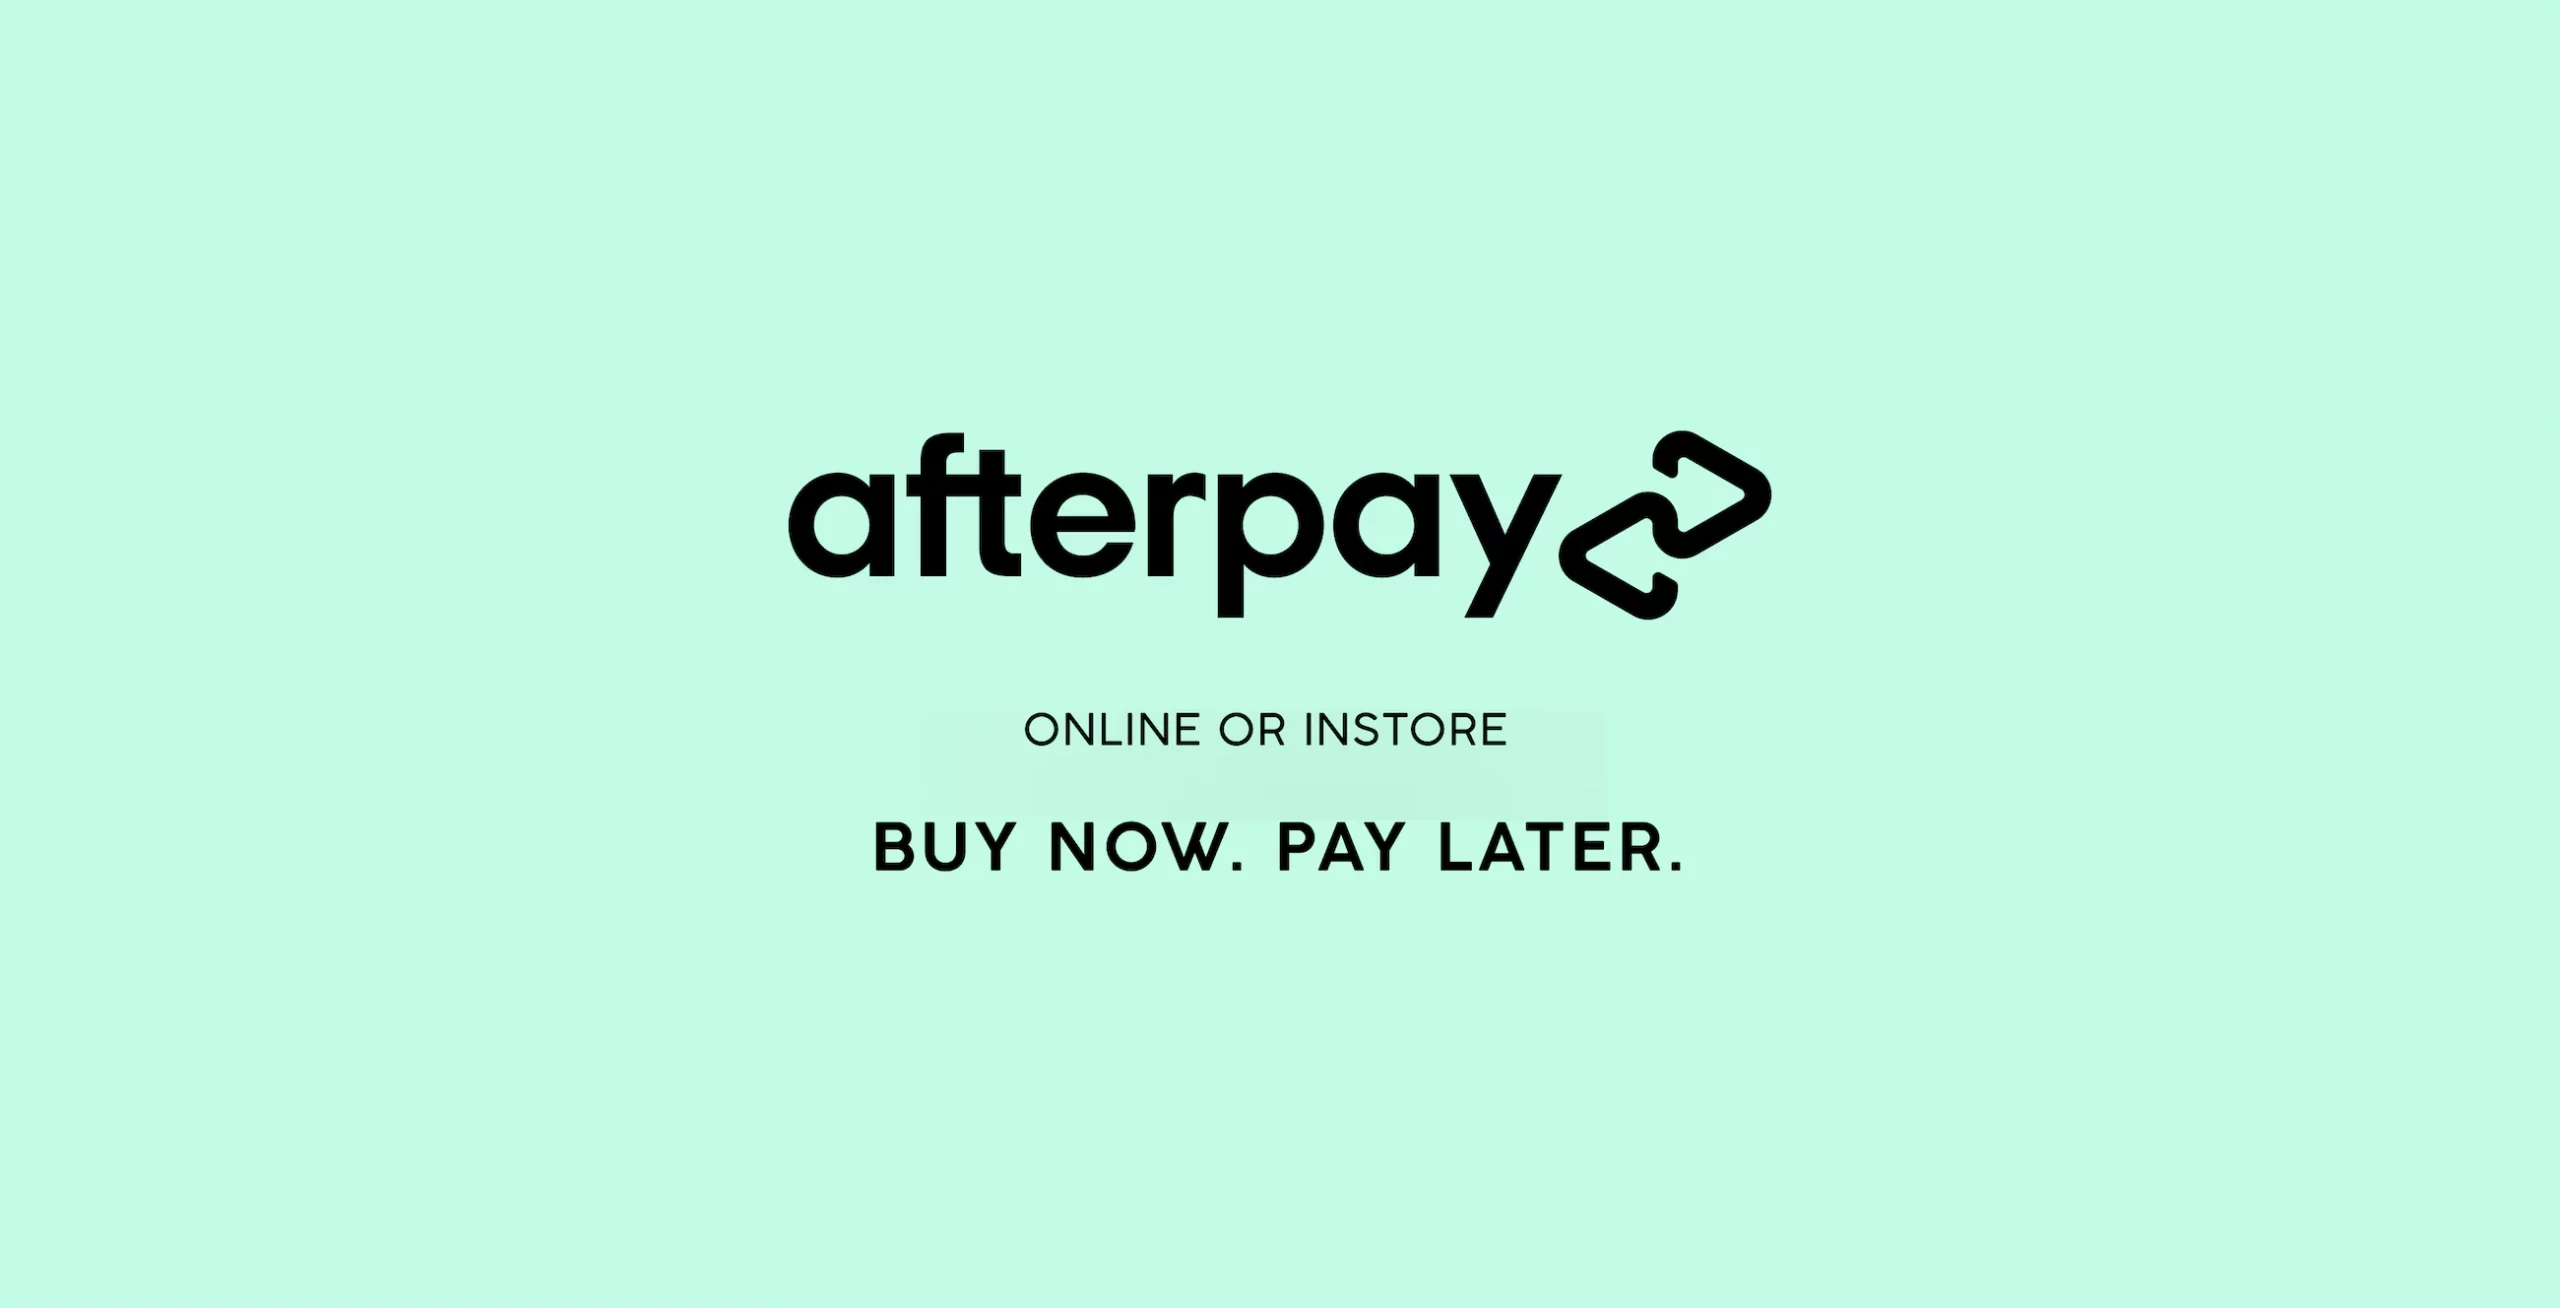 Afterpay NYC Event Mixes IRL Product Drops and Immersive AR Experiences -  Retail TouchPoints